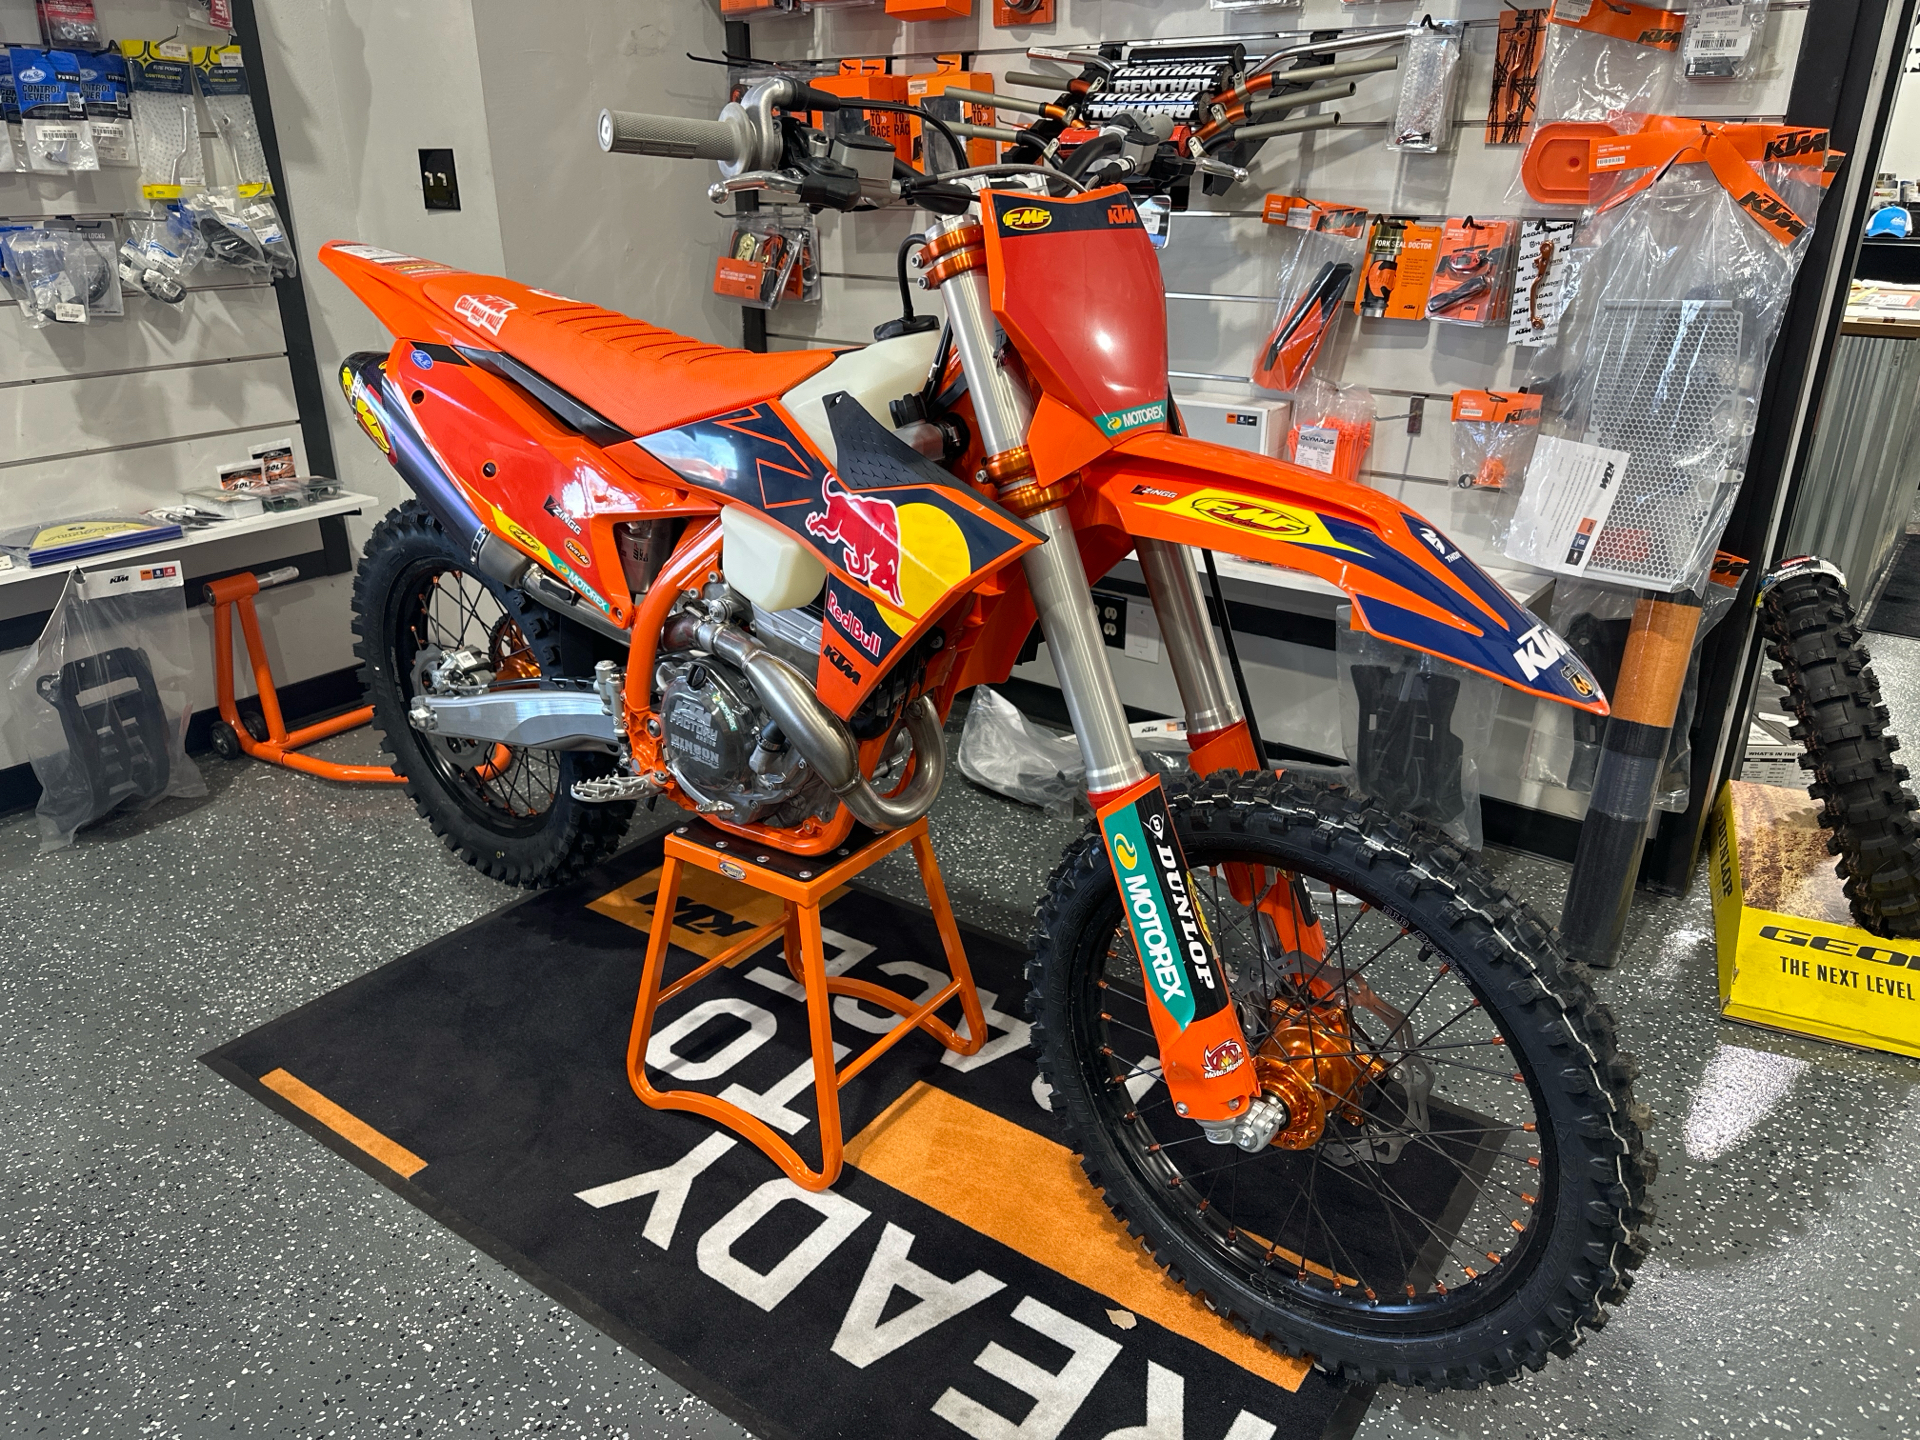 2024 KTM 350 XC-F Factory Edition in Paso Robles, California - Photo 1